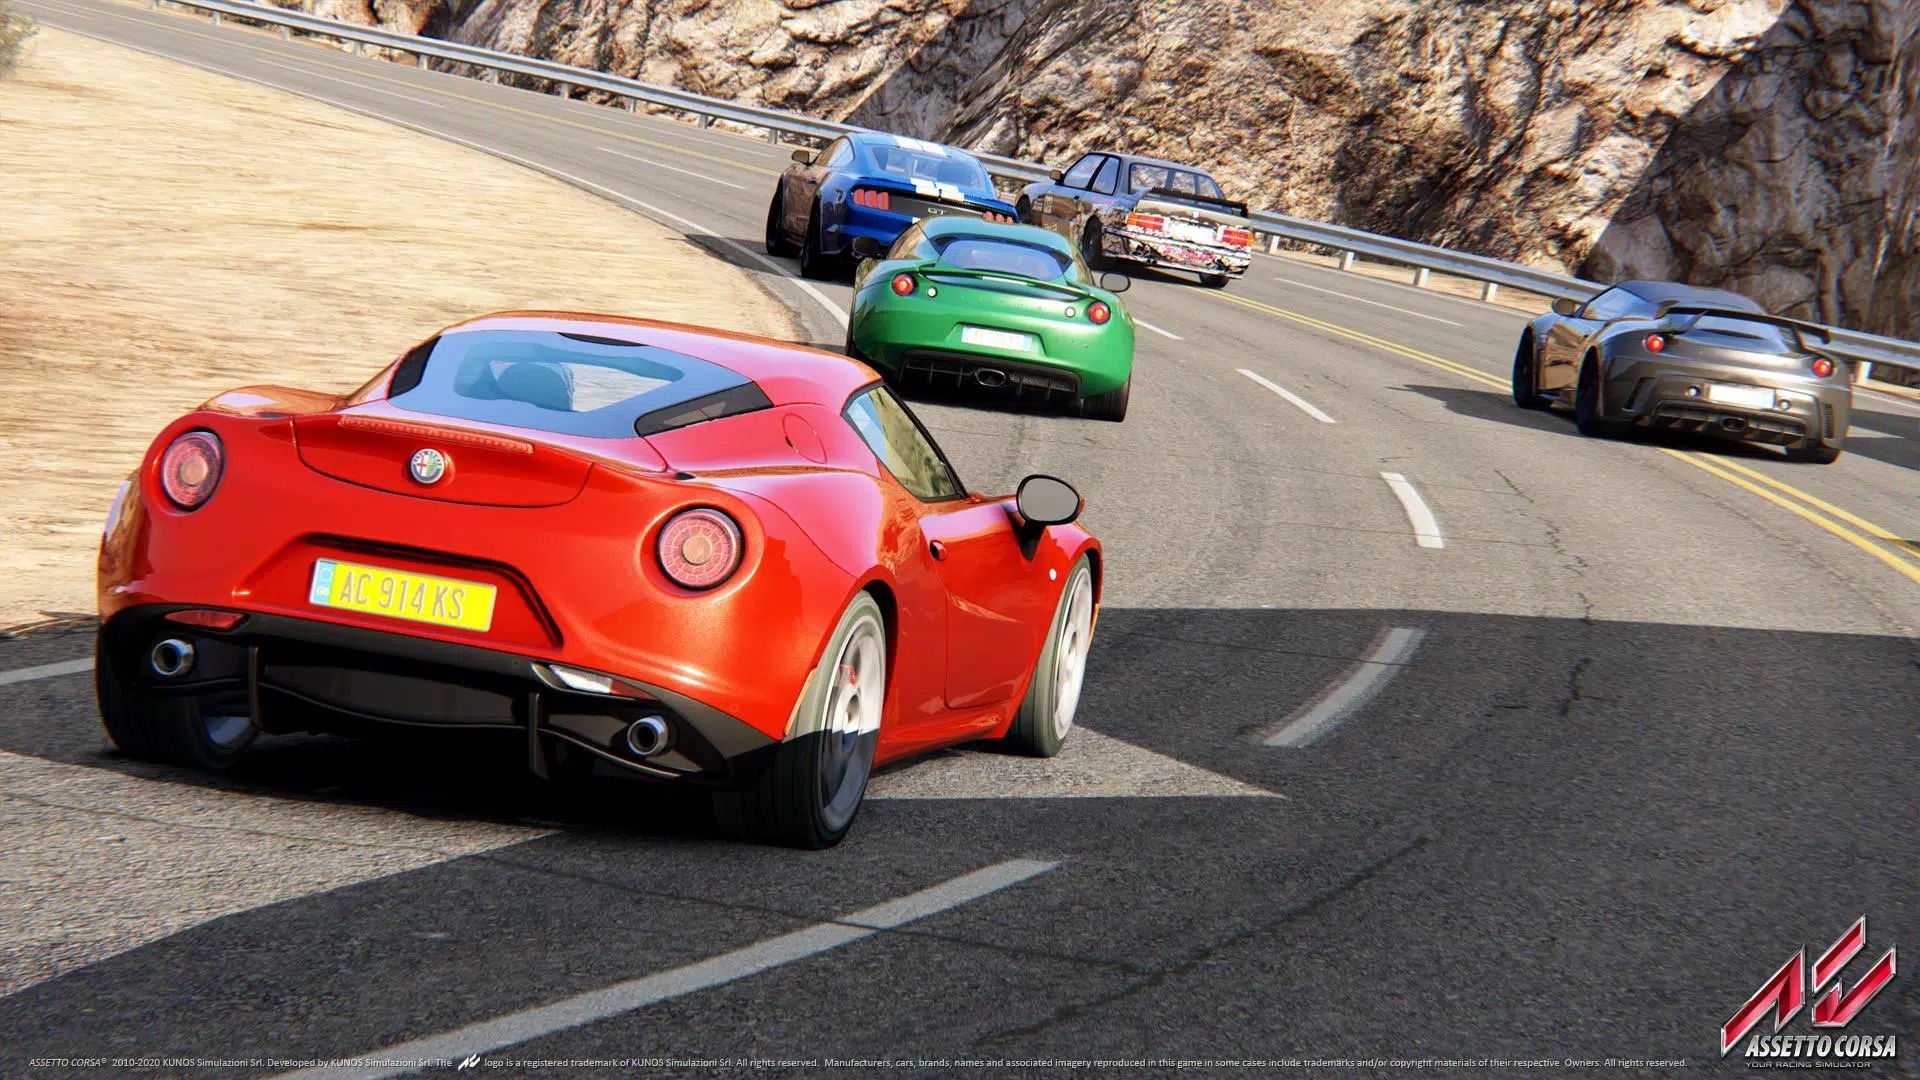 Assetto Corsa Racing Mobile APK for Android Download